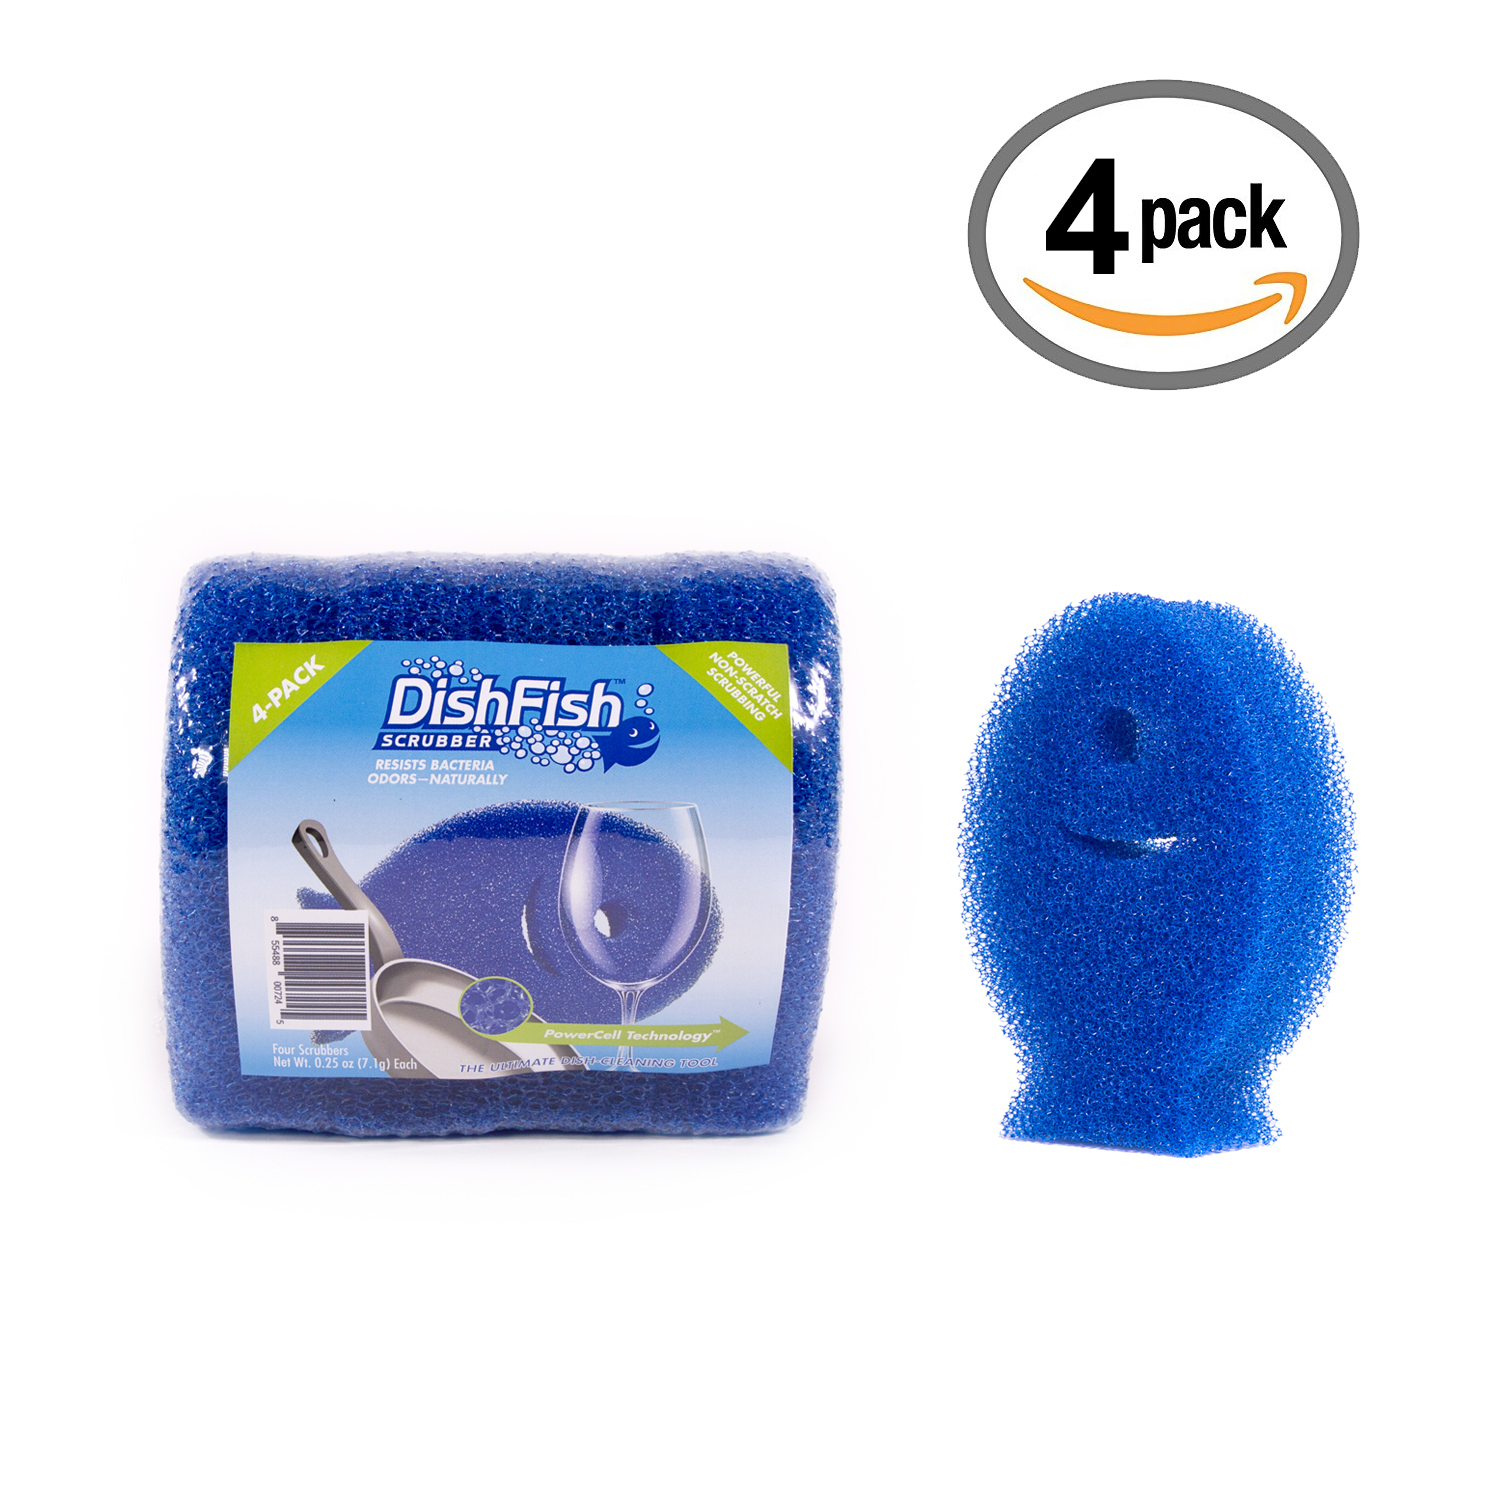 dishfish-scrubber-4-pack-product-with-package.jpg